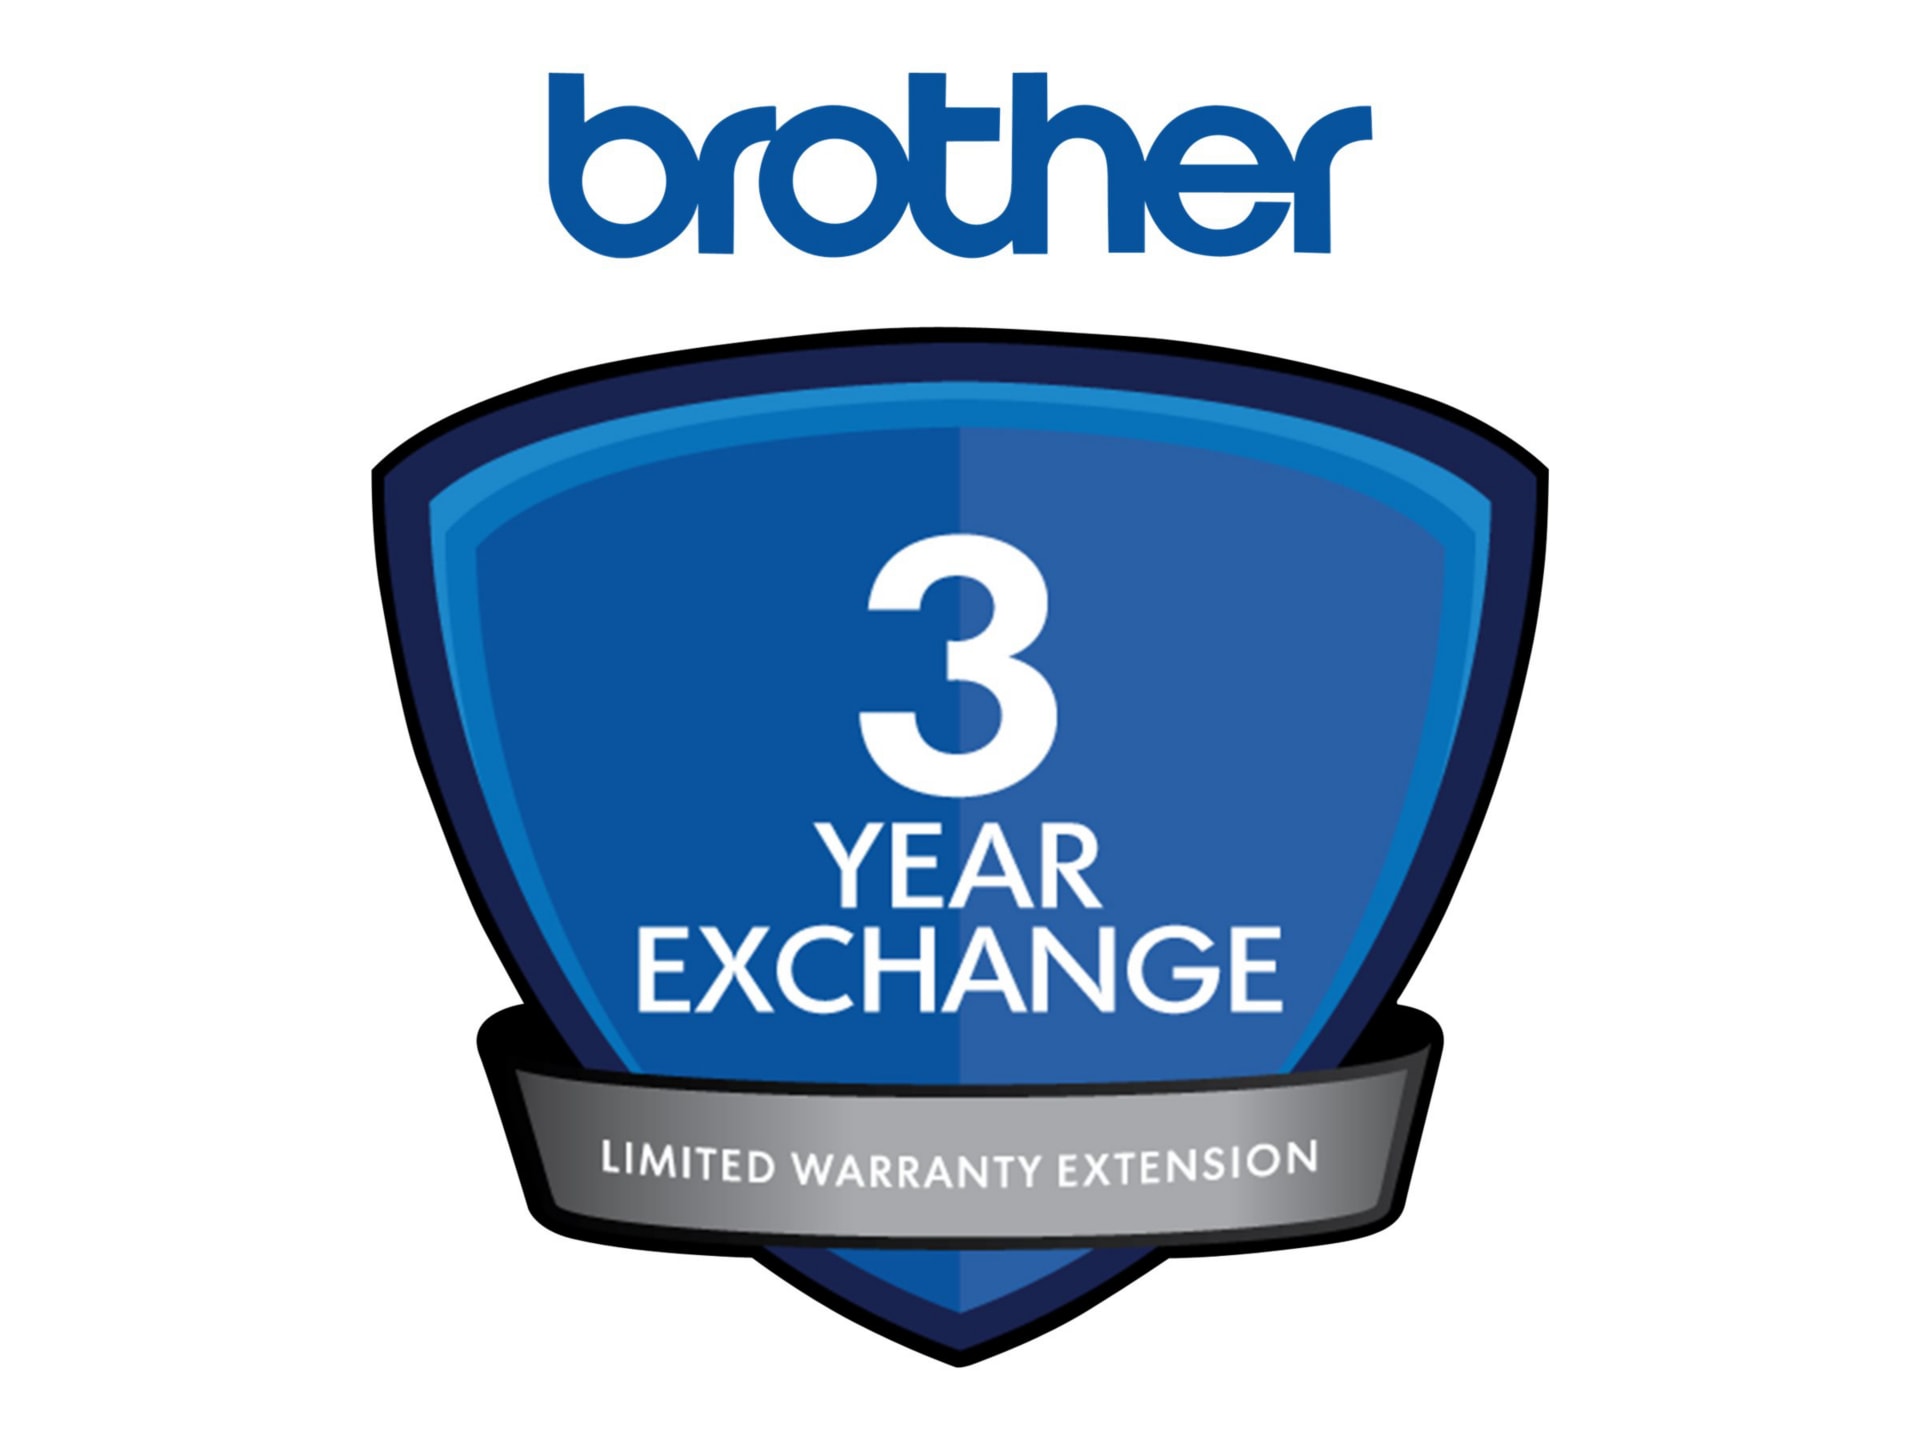 Brother On Site Warranty Service and Support - extended service agreement -